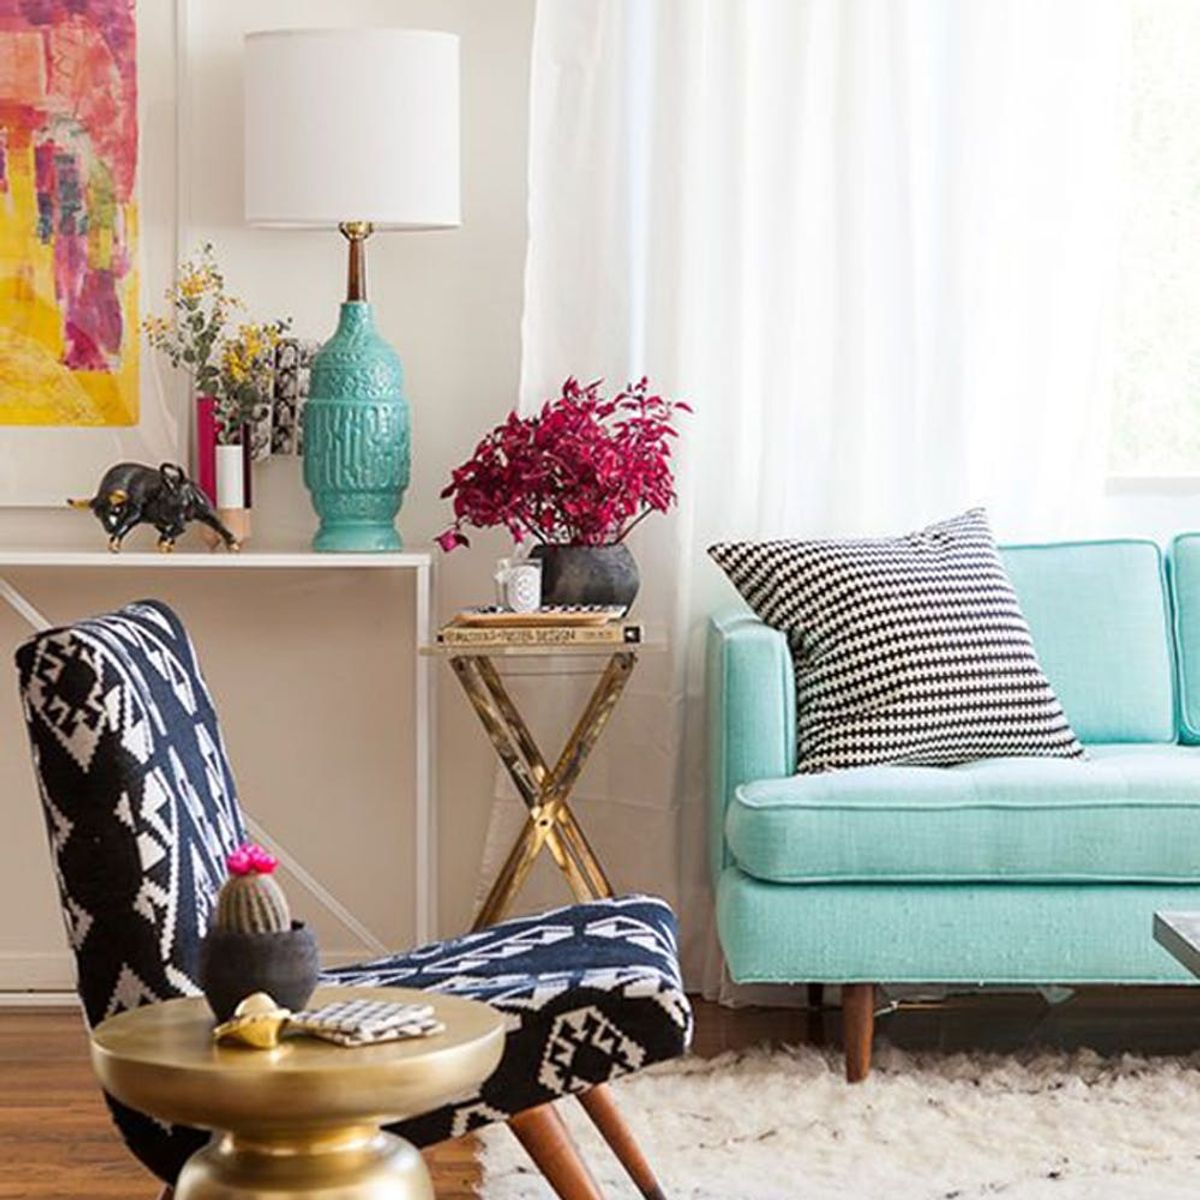 9 Ways to Decorate With December’s Birthstone: Turquoise